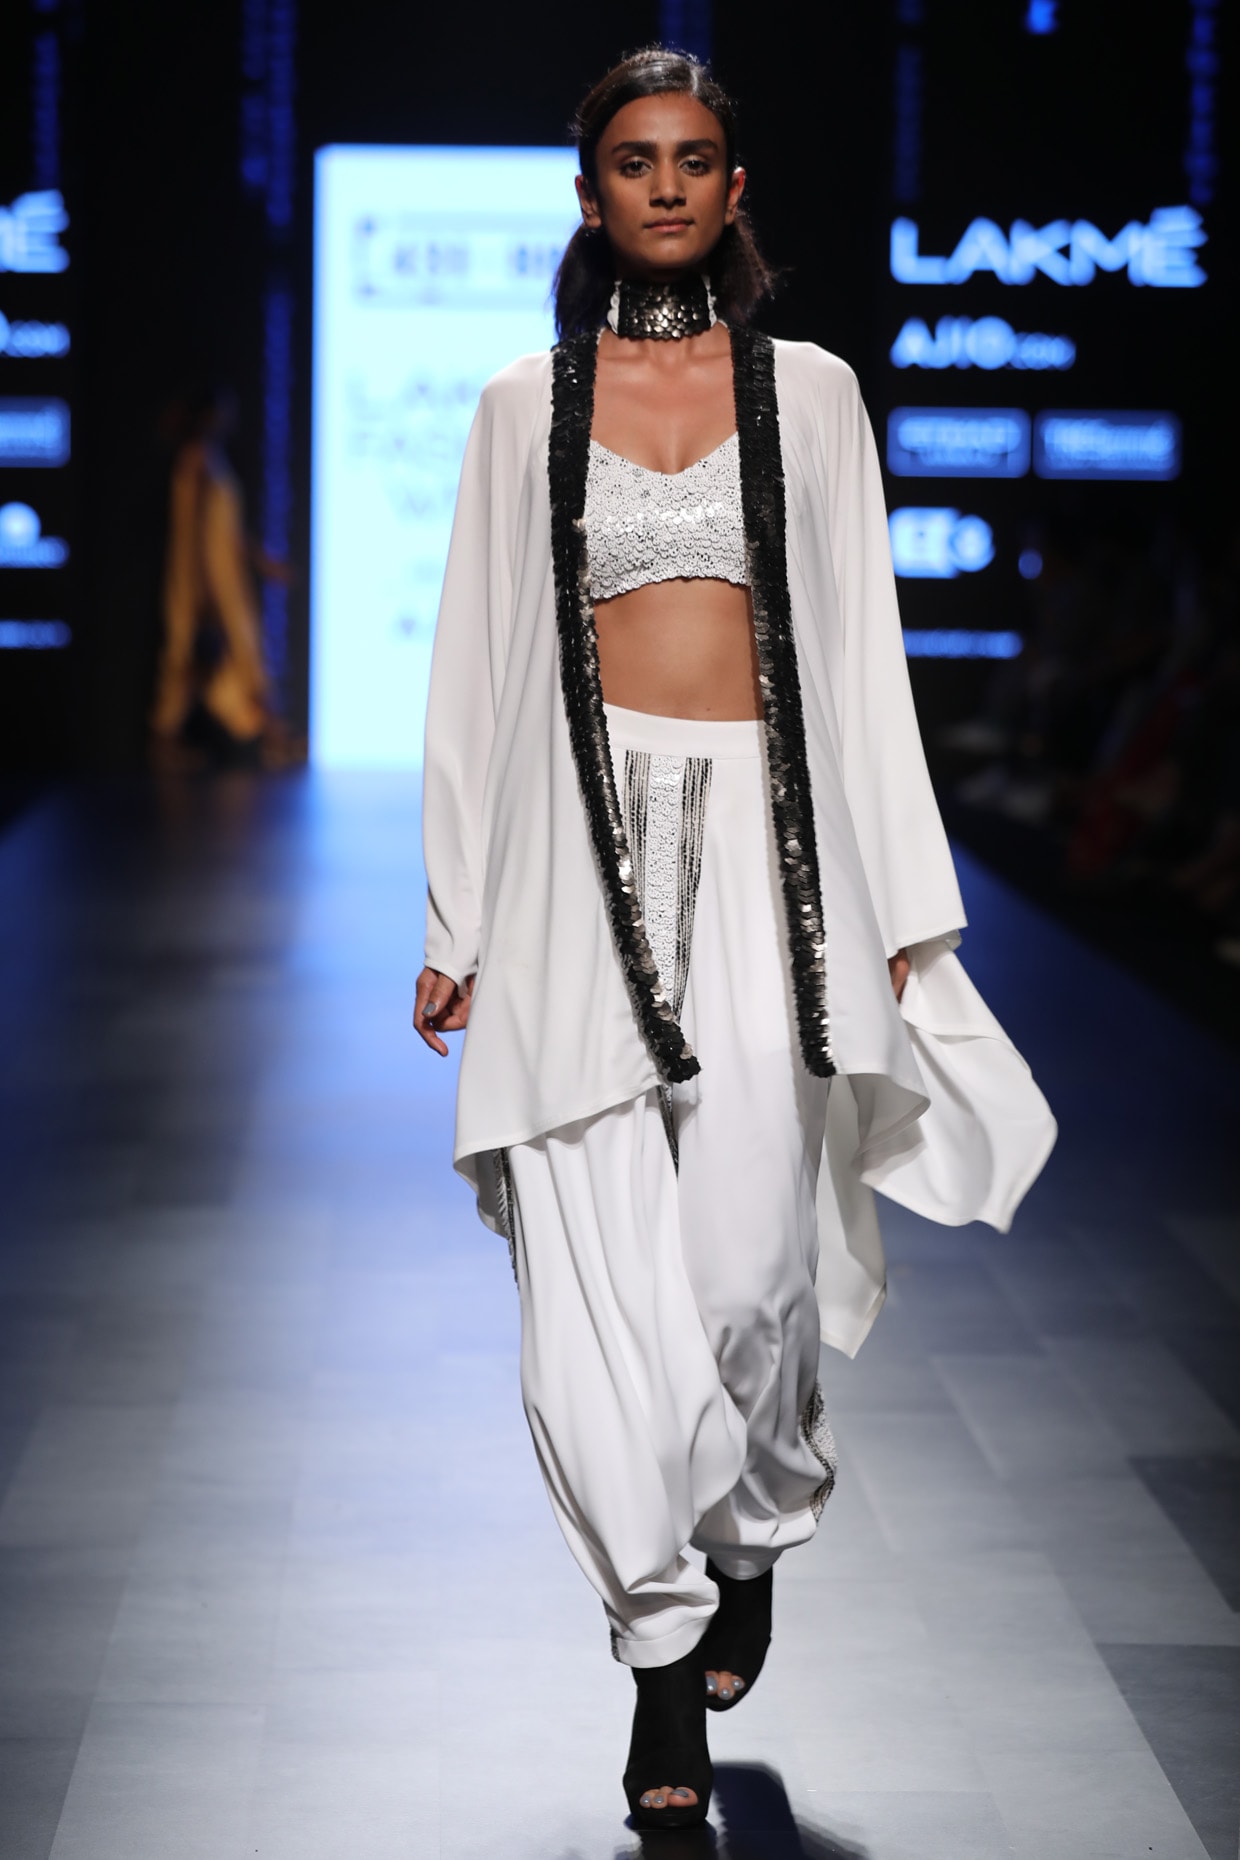 Harem Pants Made Their Way to Runways in 2012 | Harem Pants … | Flickr